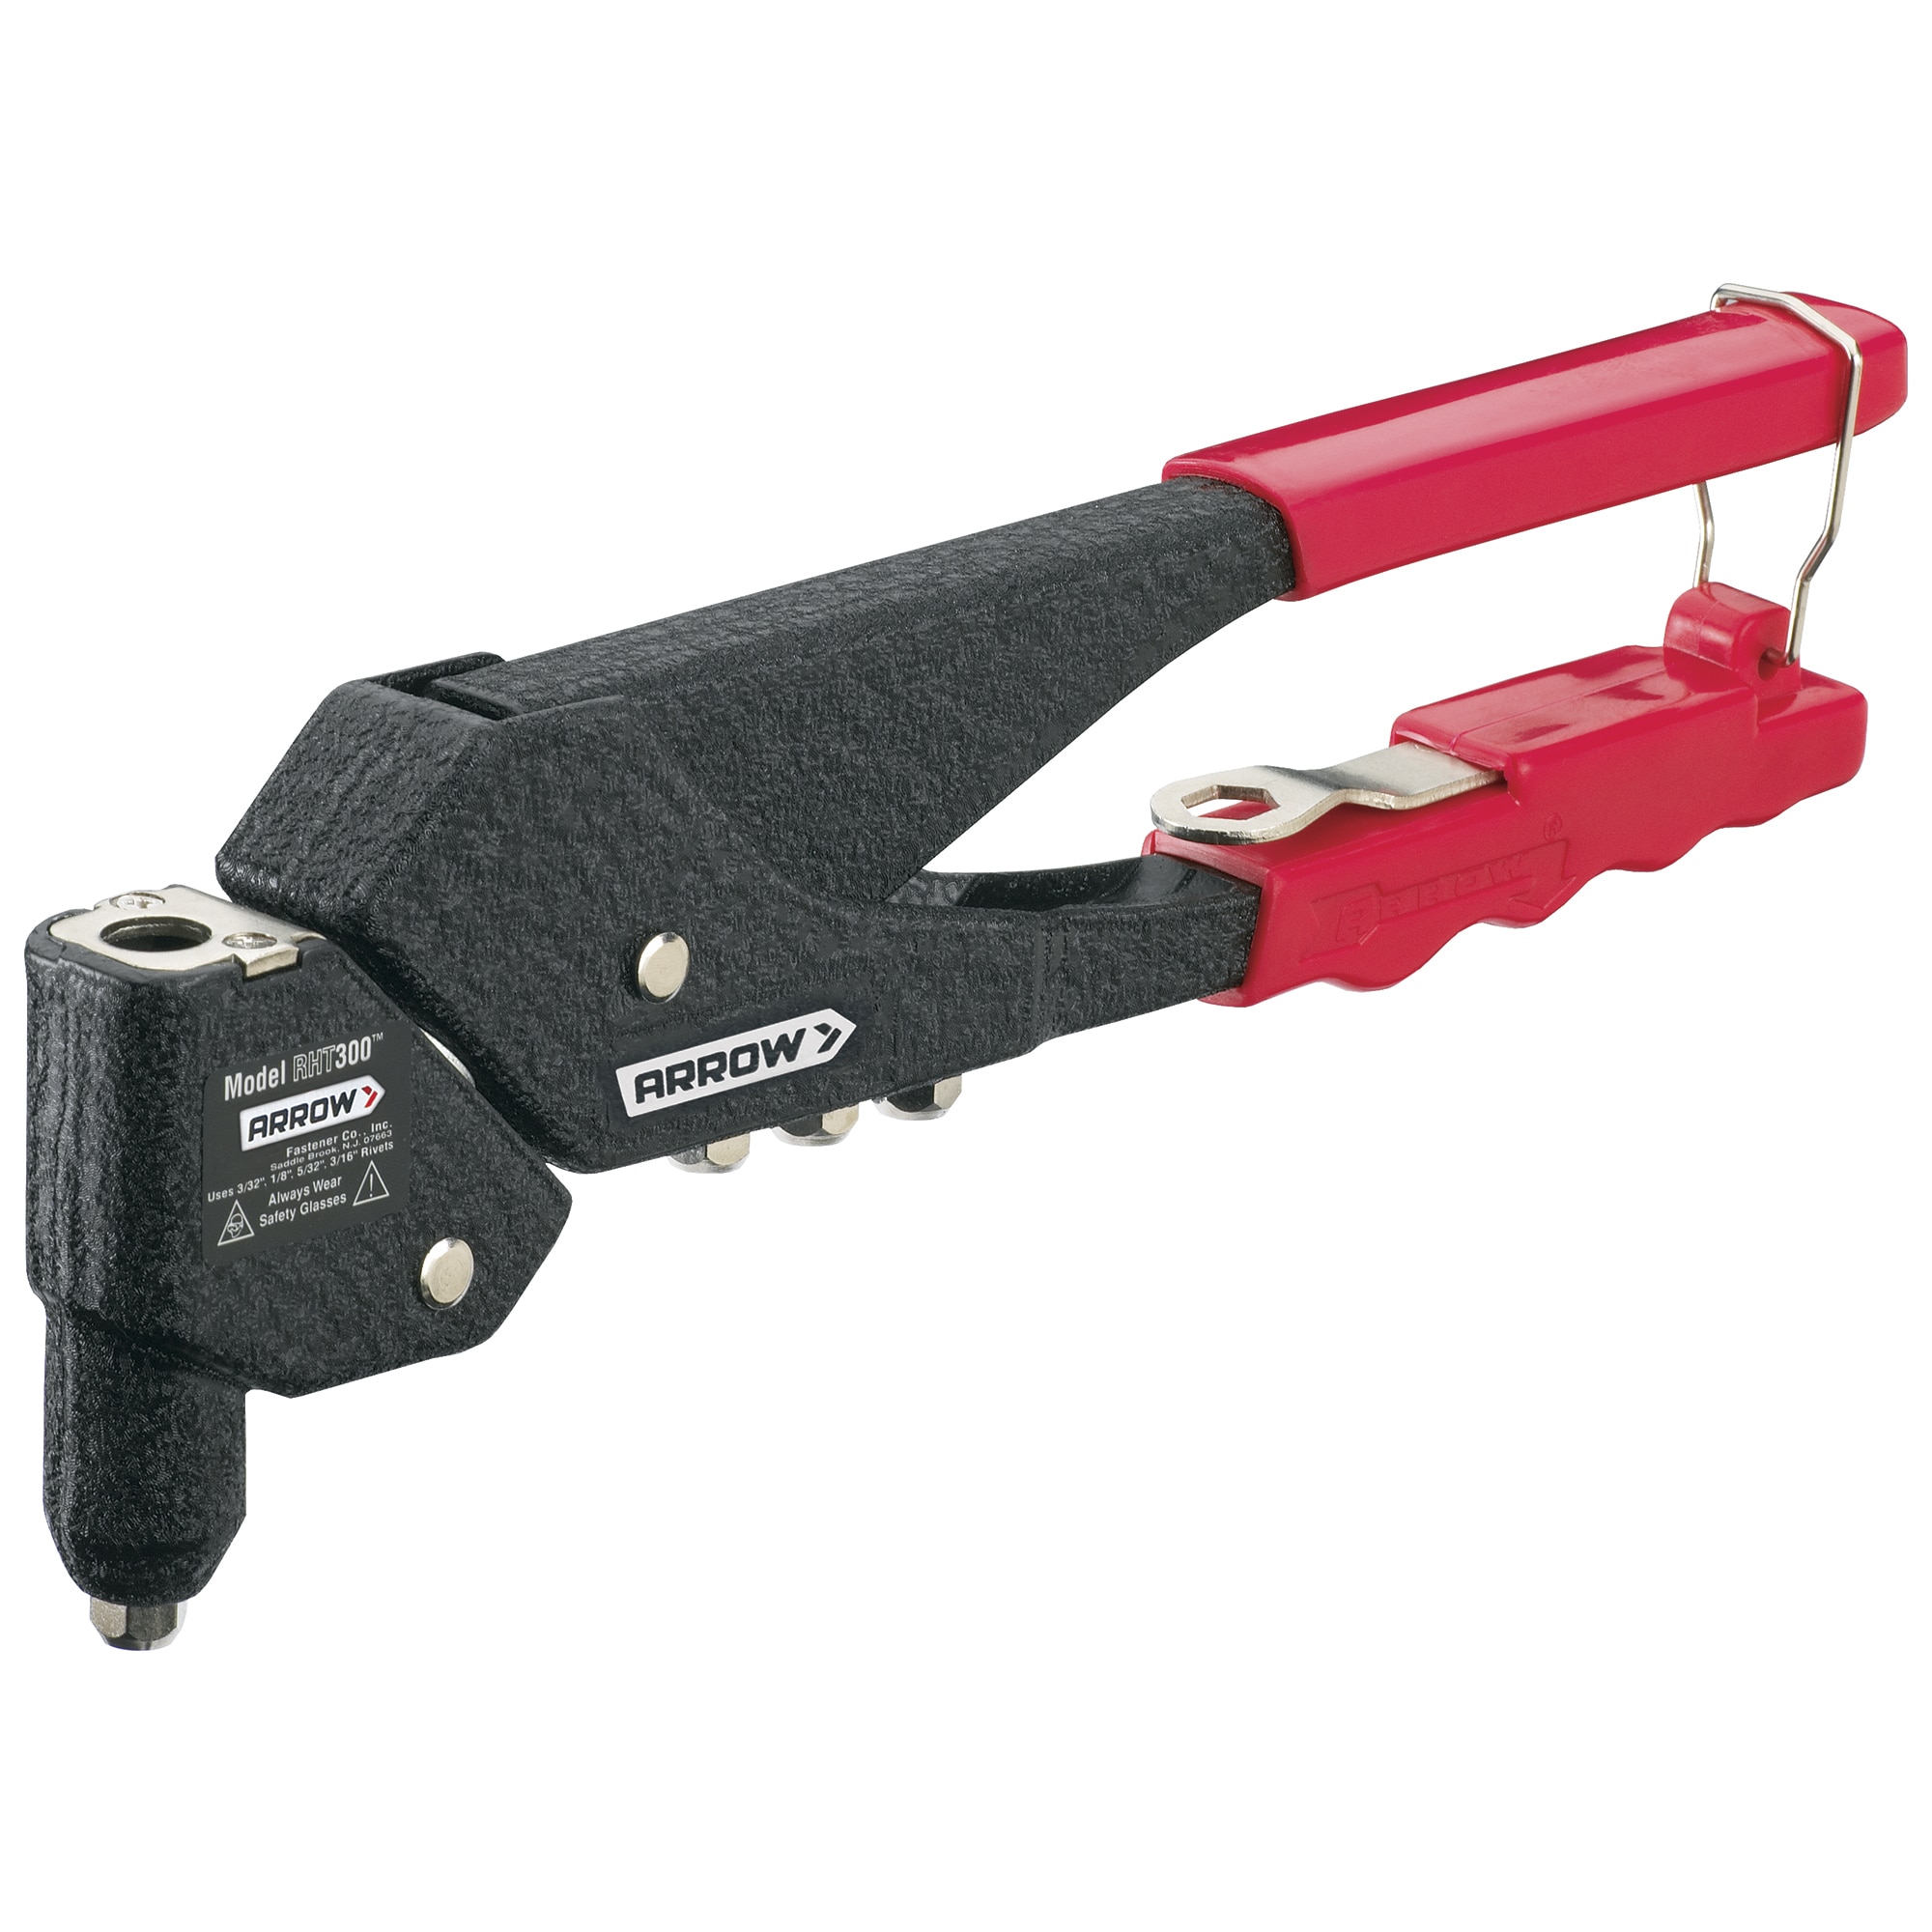 Arrow Swivel Tool the Riveters department at Lowes.com